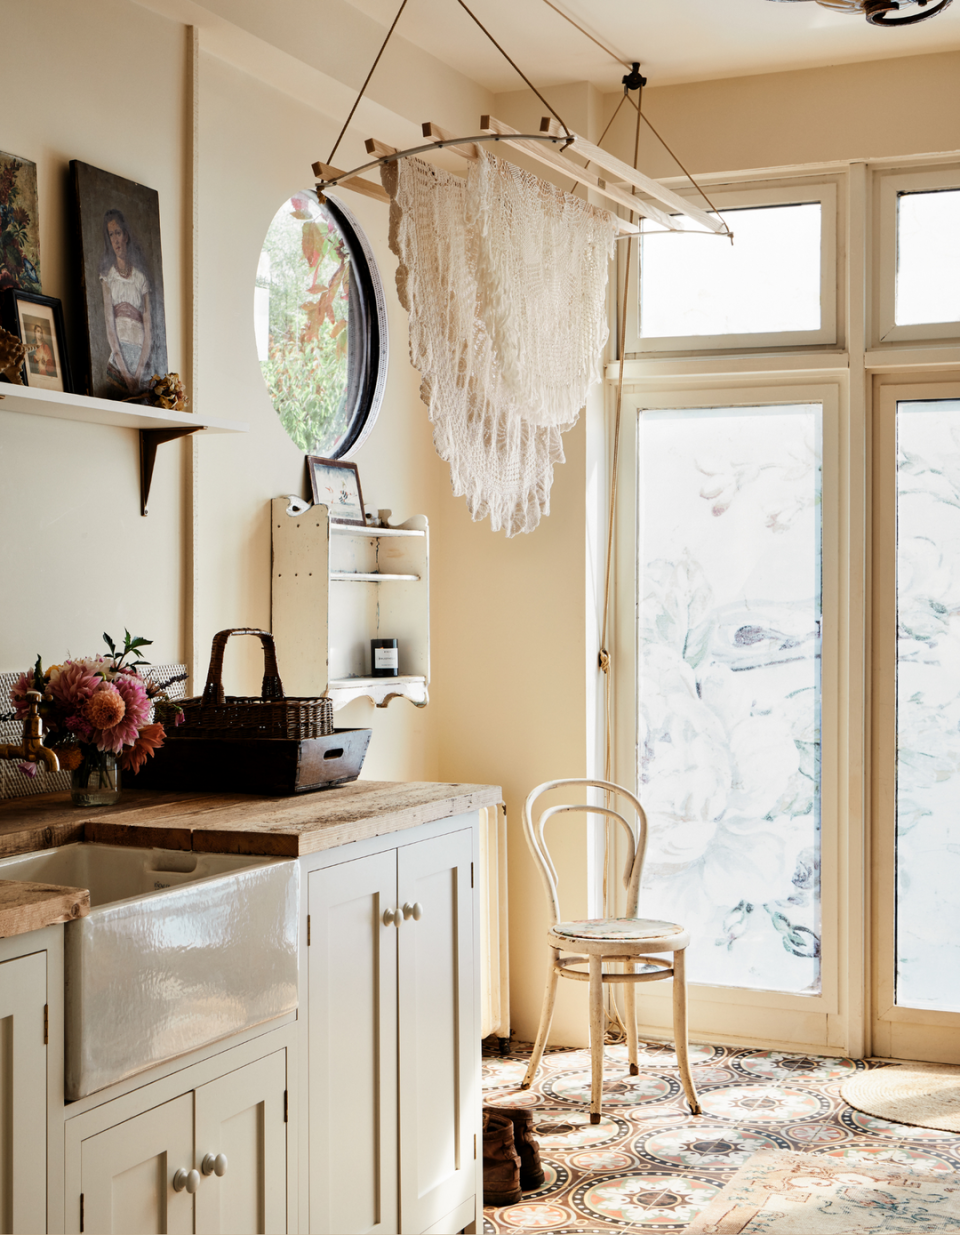 <p>Ceiling drying racks are becoming hugely popular – they are currently the most popular utility room trend on TikTok according to research by Magnet – and they are a great choice for smaller kitchens. Choose a natural wood design so it feels a touch vintage and <a href="https://www.housebeautiful.com/uk/decorate/kitchen/a2466/country-kitchen/" rel="nofollow noopener" target="_blank" data-ylk="slk:country-inspired" class="link ">country-inspired</a>, rather than purely functional. <br></p><p>Pictured: <a href="https://www.bertandmay.com/products/quinta-marron-antique-tile" rel="nofollow noopener" target="_blank" data-ylk="slk:Quinta Marron Tile at Bert & May" class="link ">Quinta Marron Tile at Bert & May</a></p>